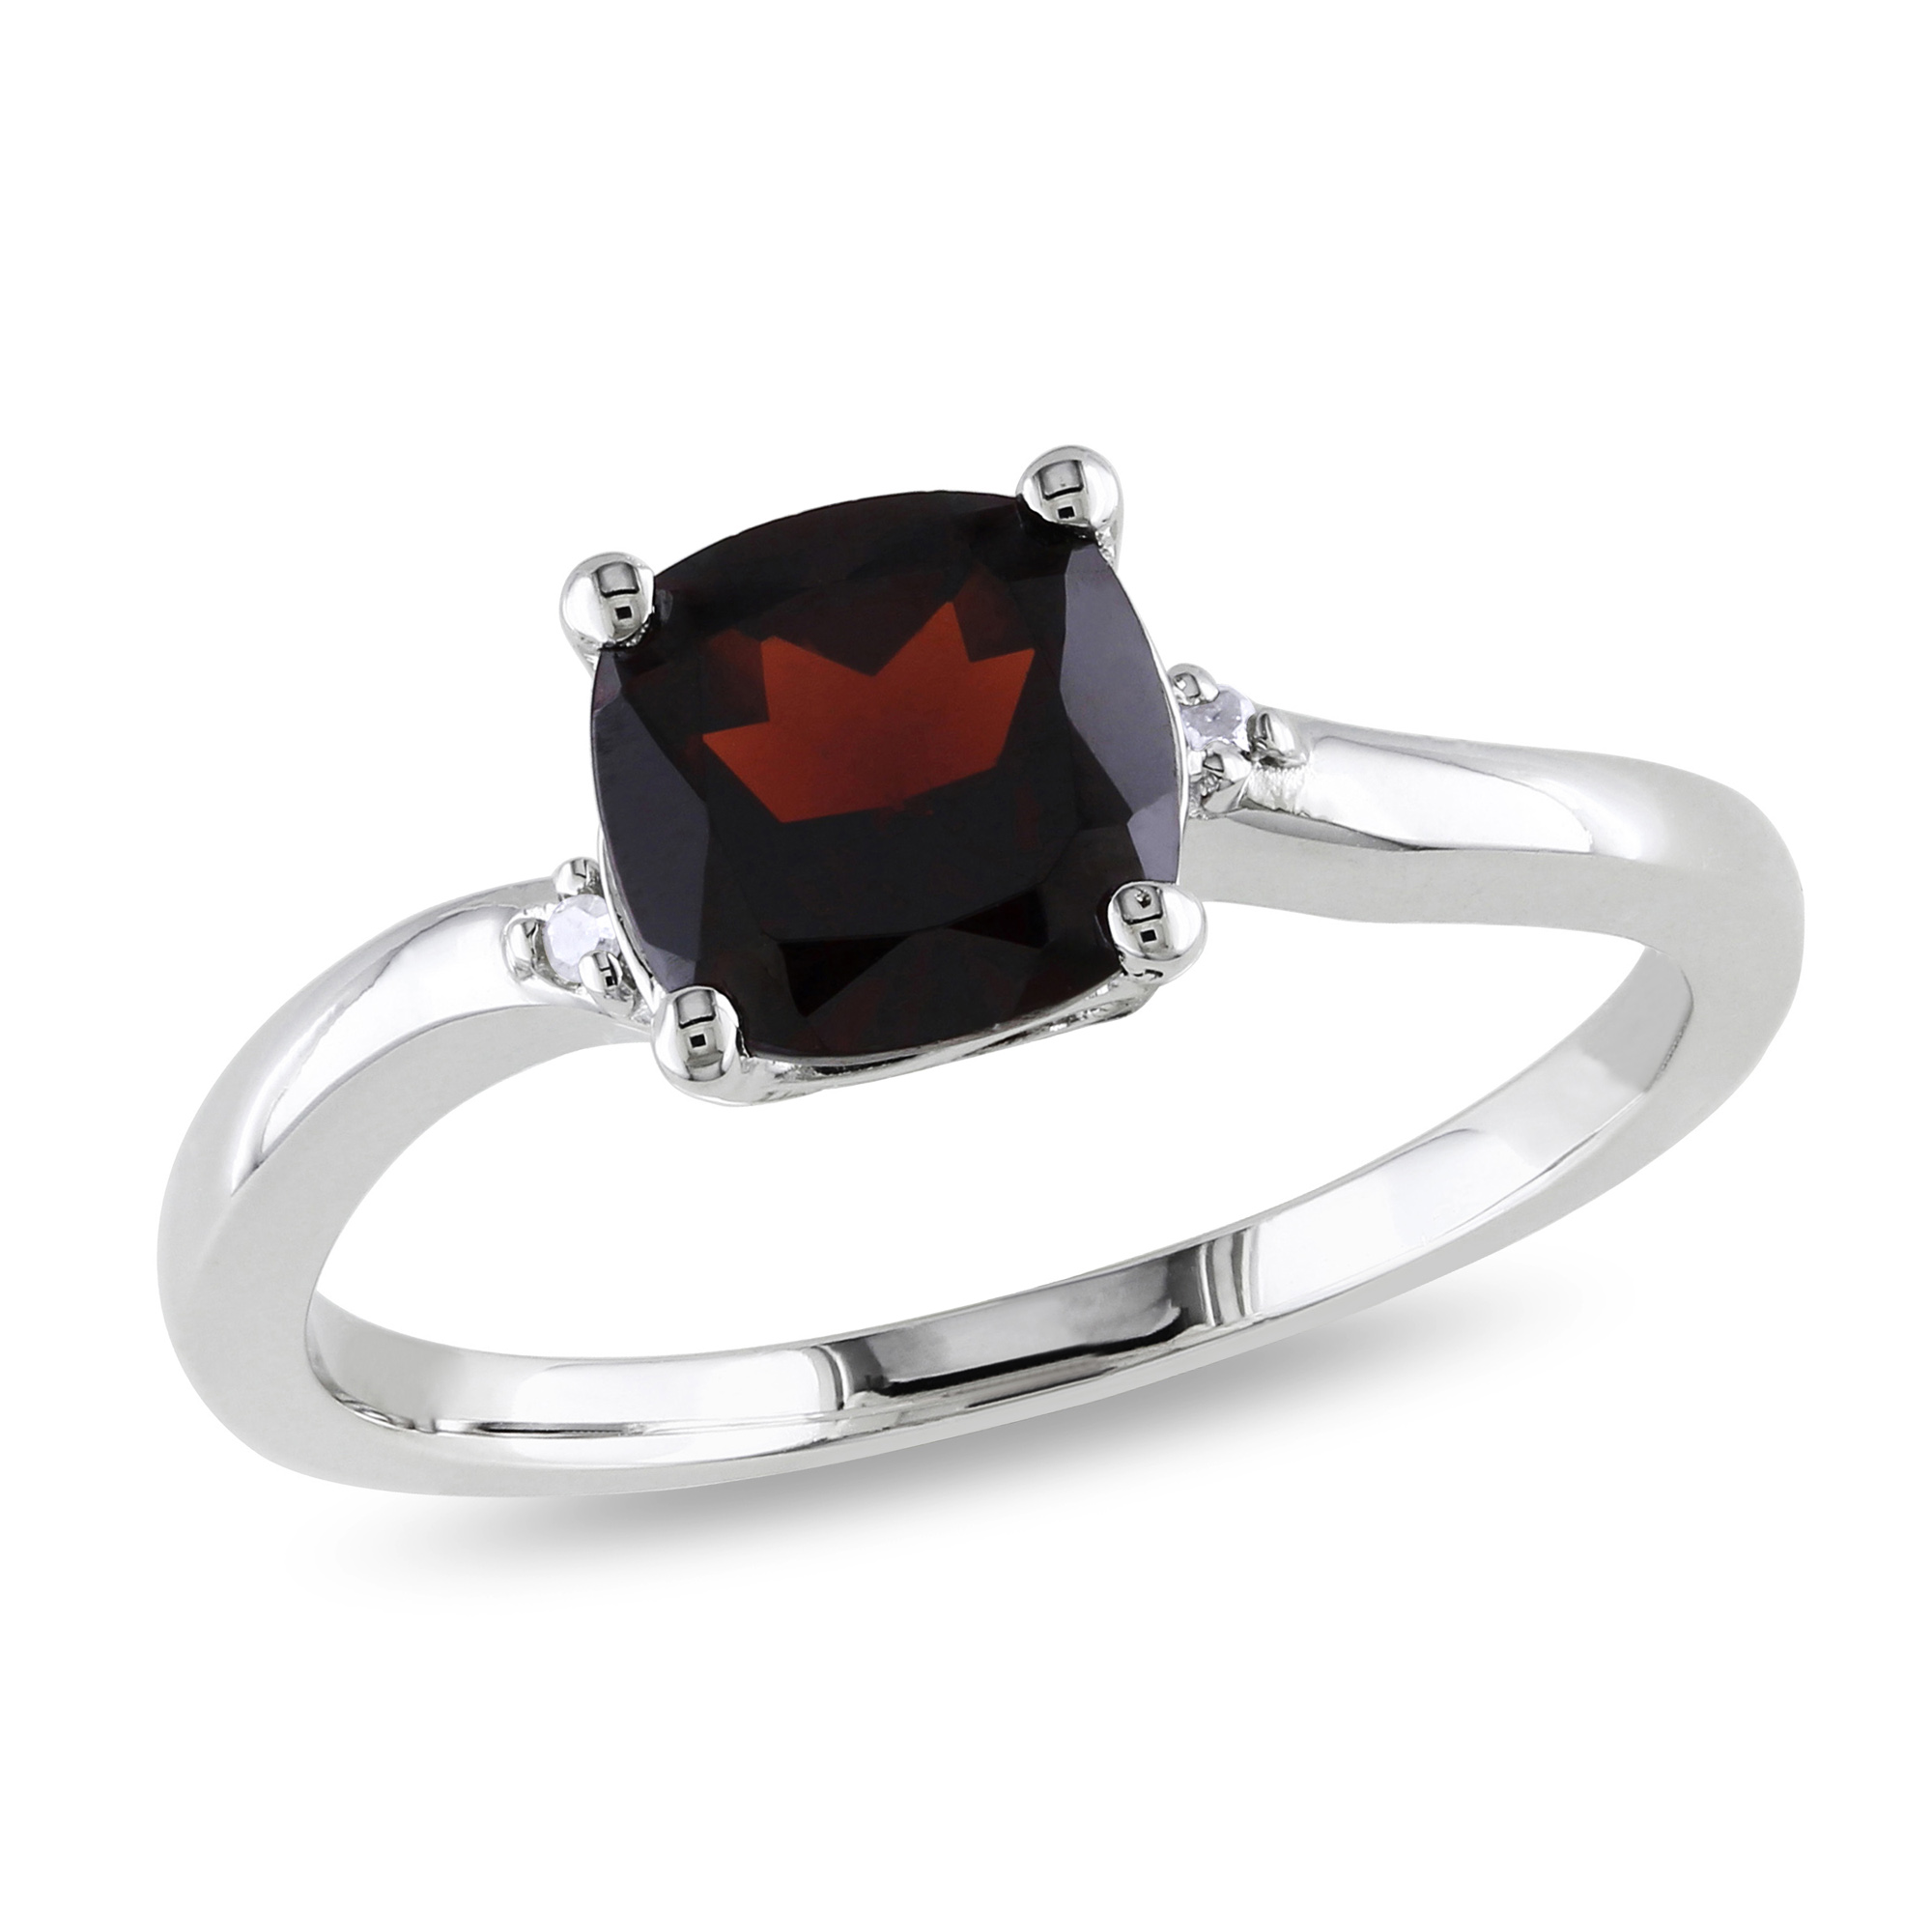 Amour 0.01 Carat T.W. Diamond and 1 3/4 Carat T.G.W. Garnet Fashion Ring in Sterling Silver I3